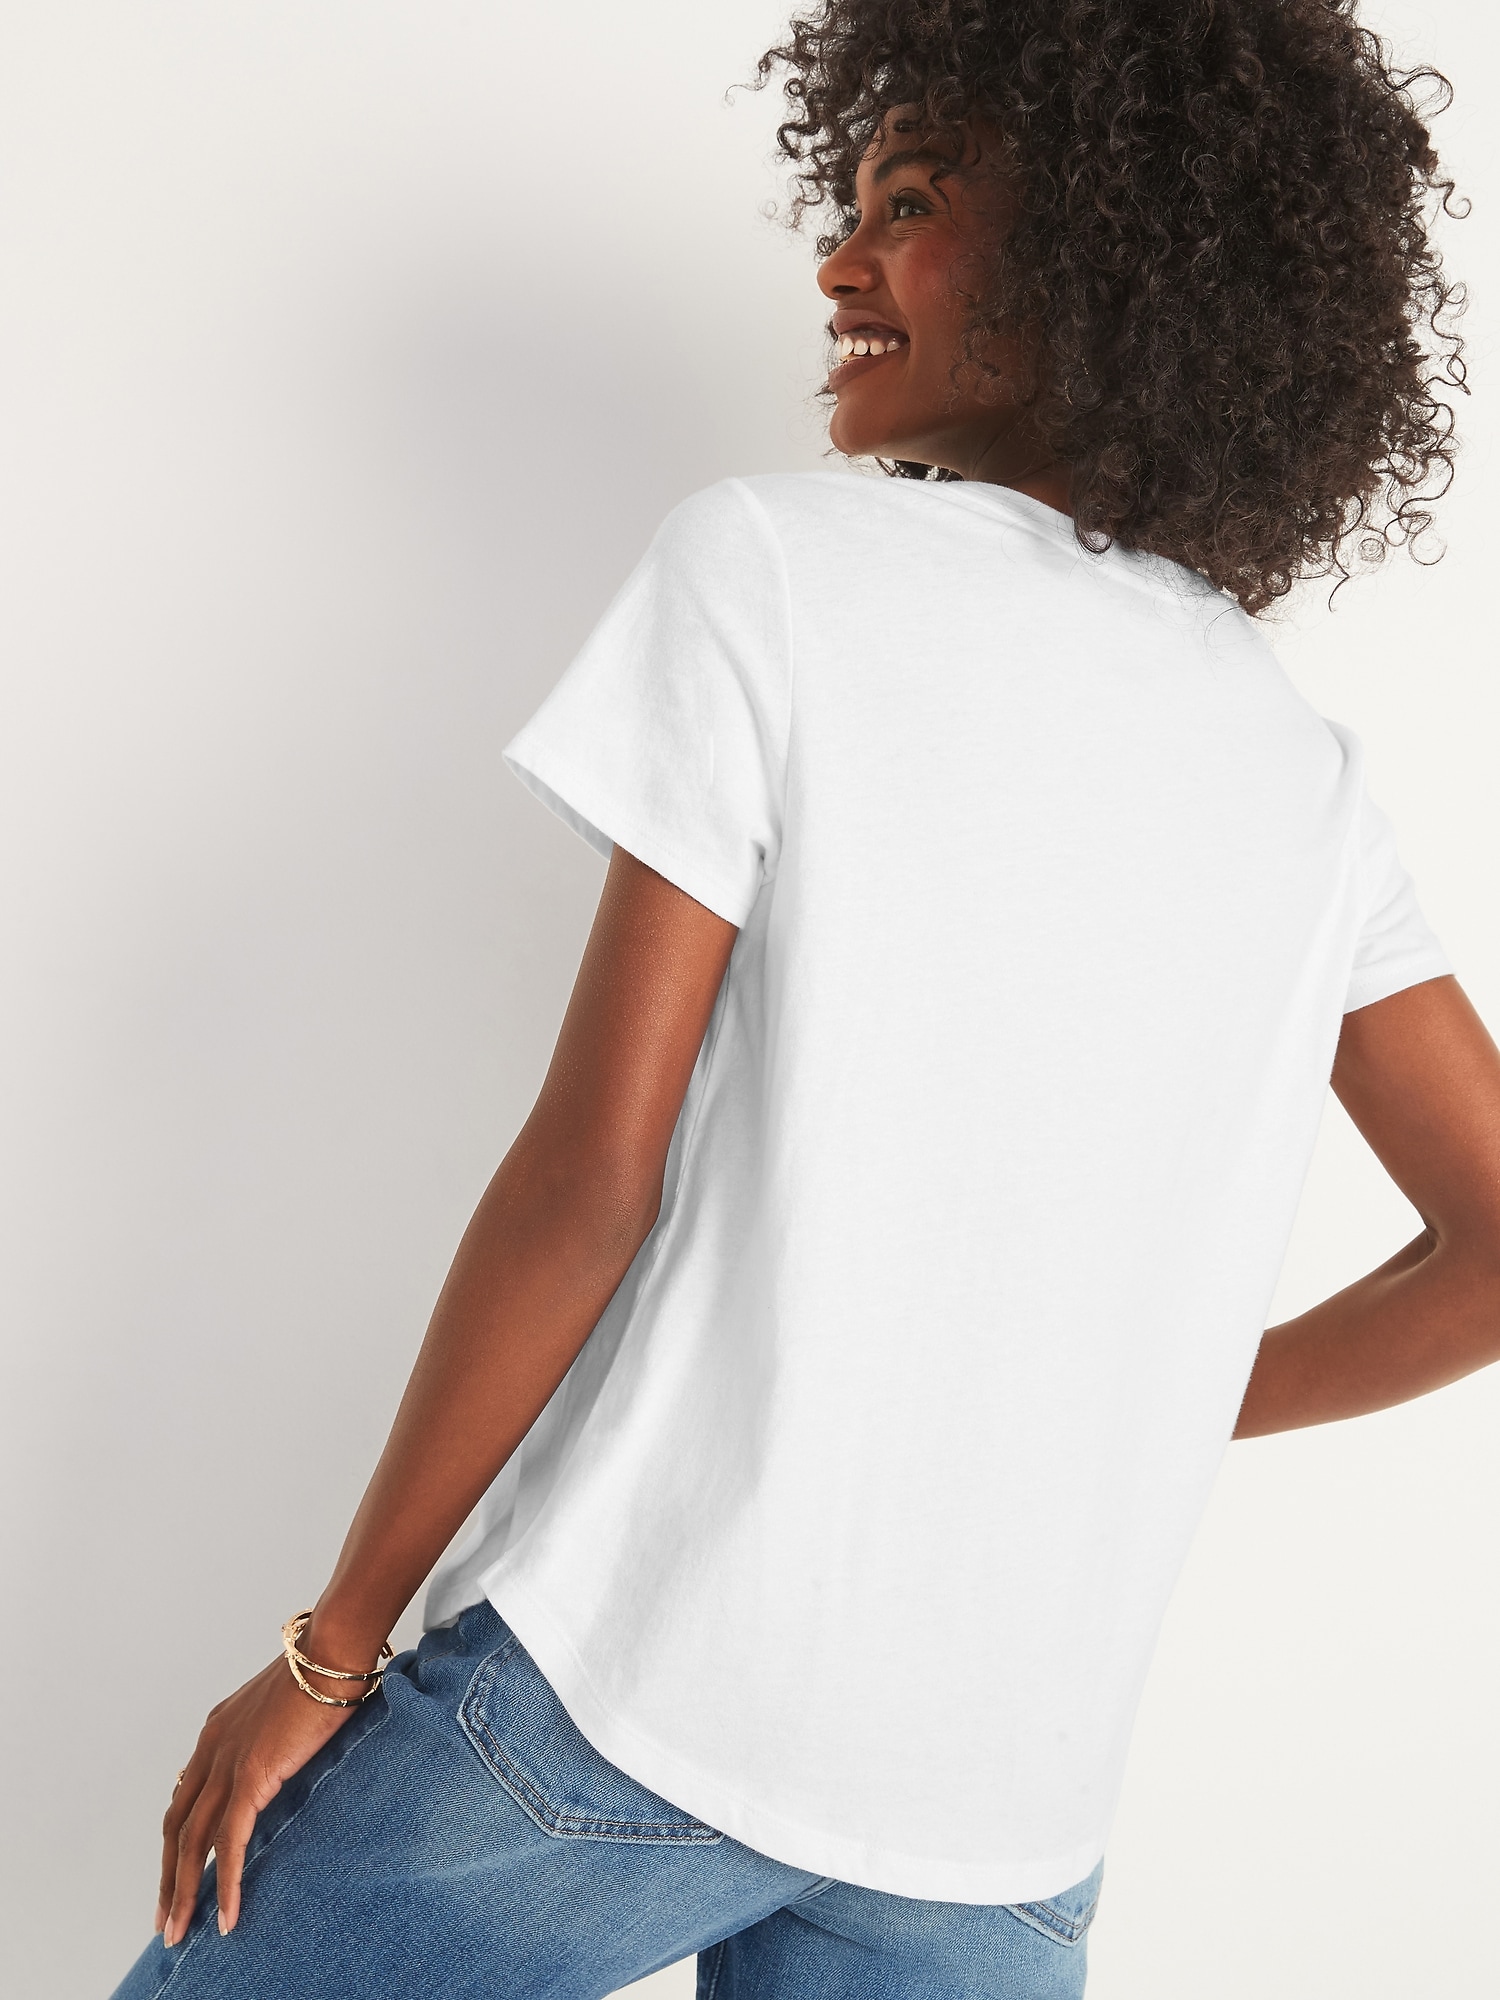 EveryWear Crew-Neck T-Shirt 3-Pack for Women | Old Navy